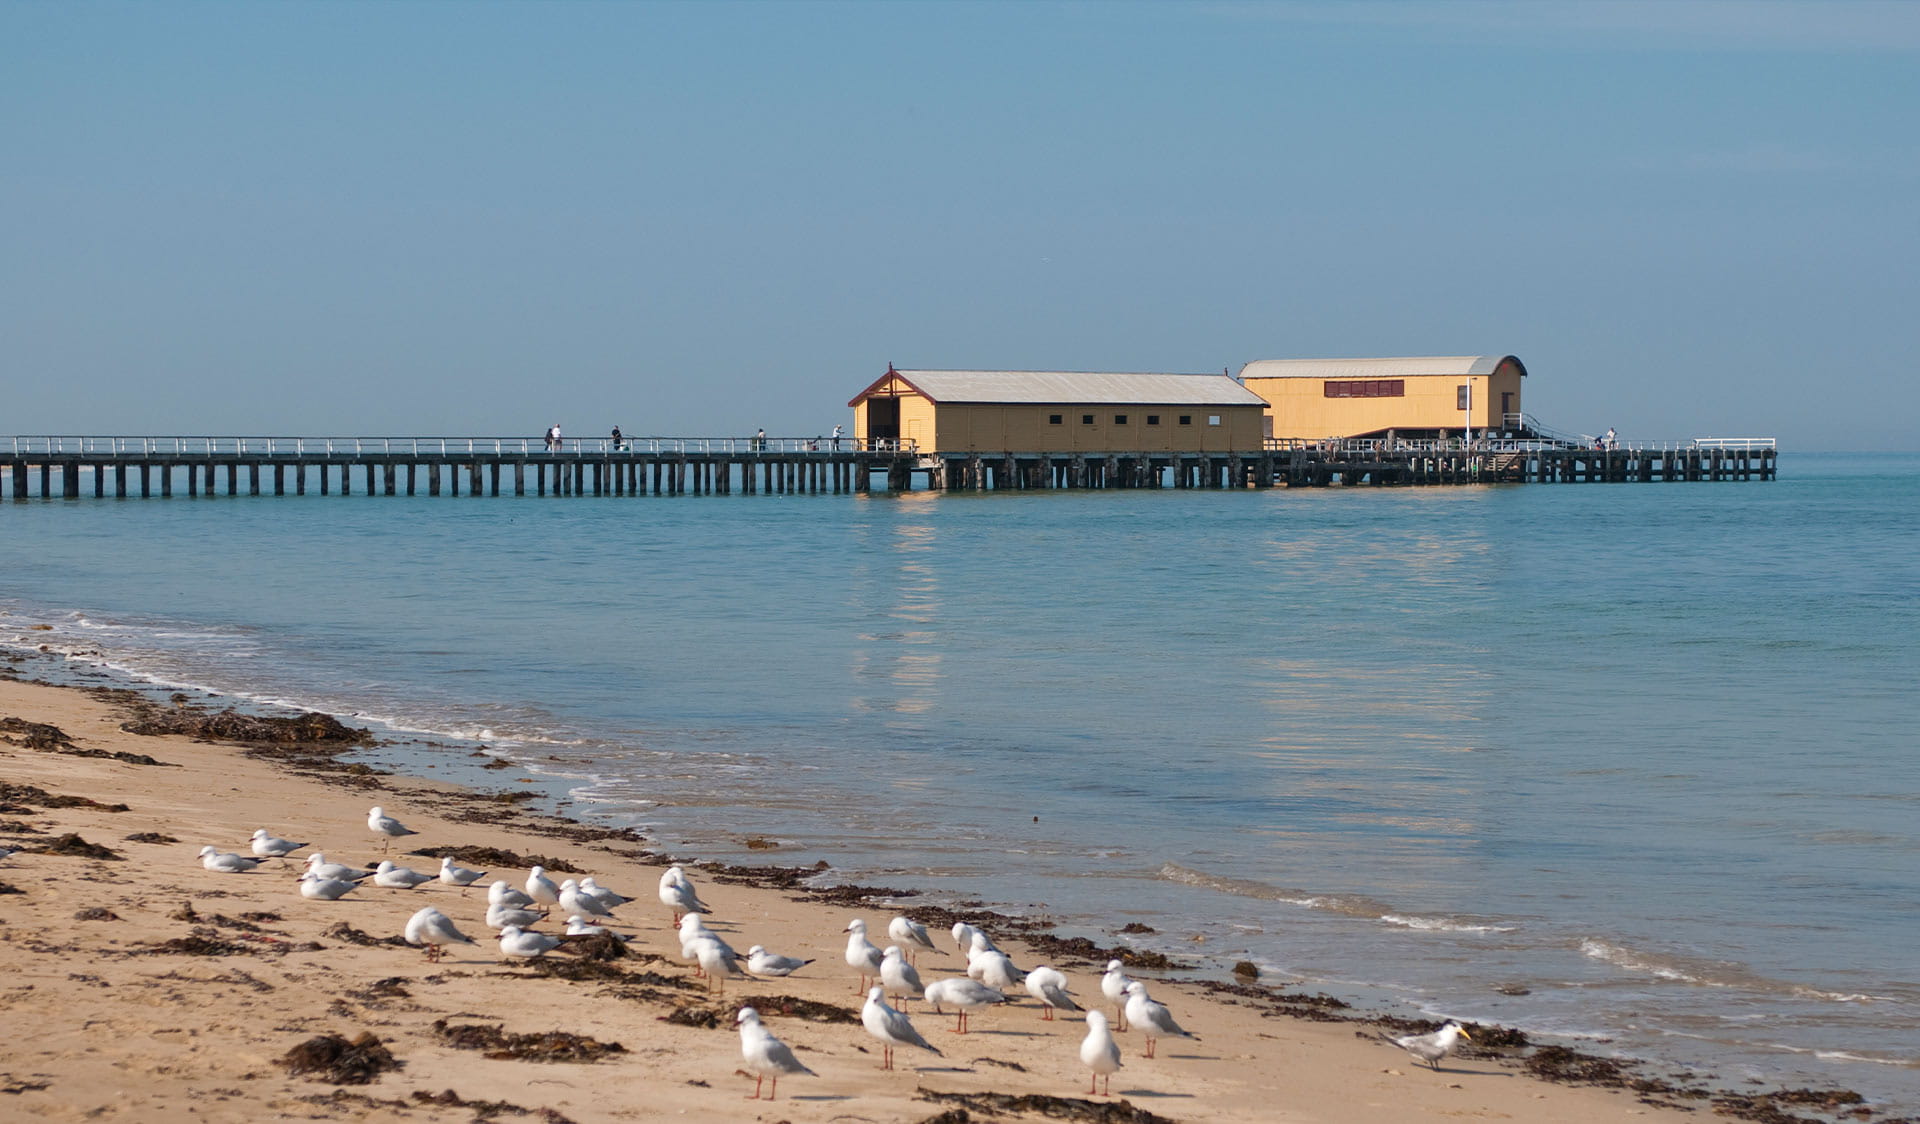 Seagulls at the water's edge in front of Queenscliff Pier